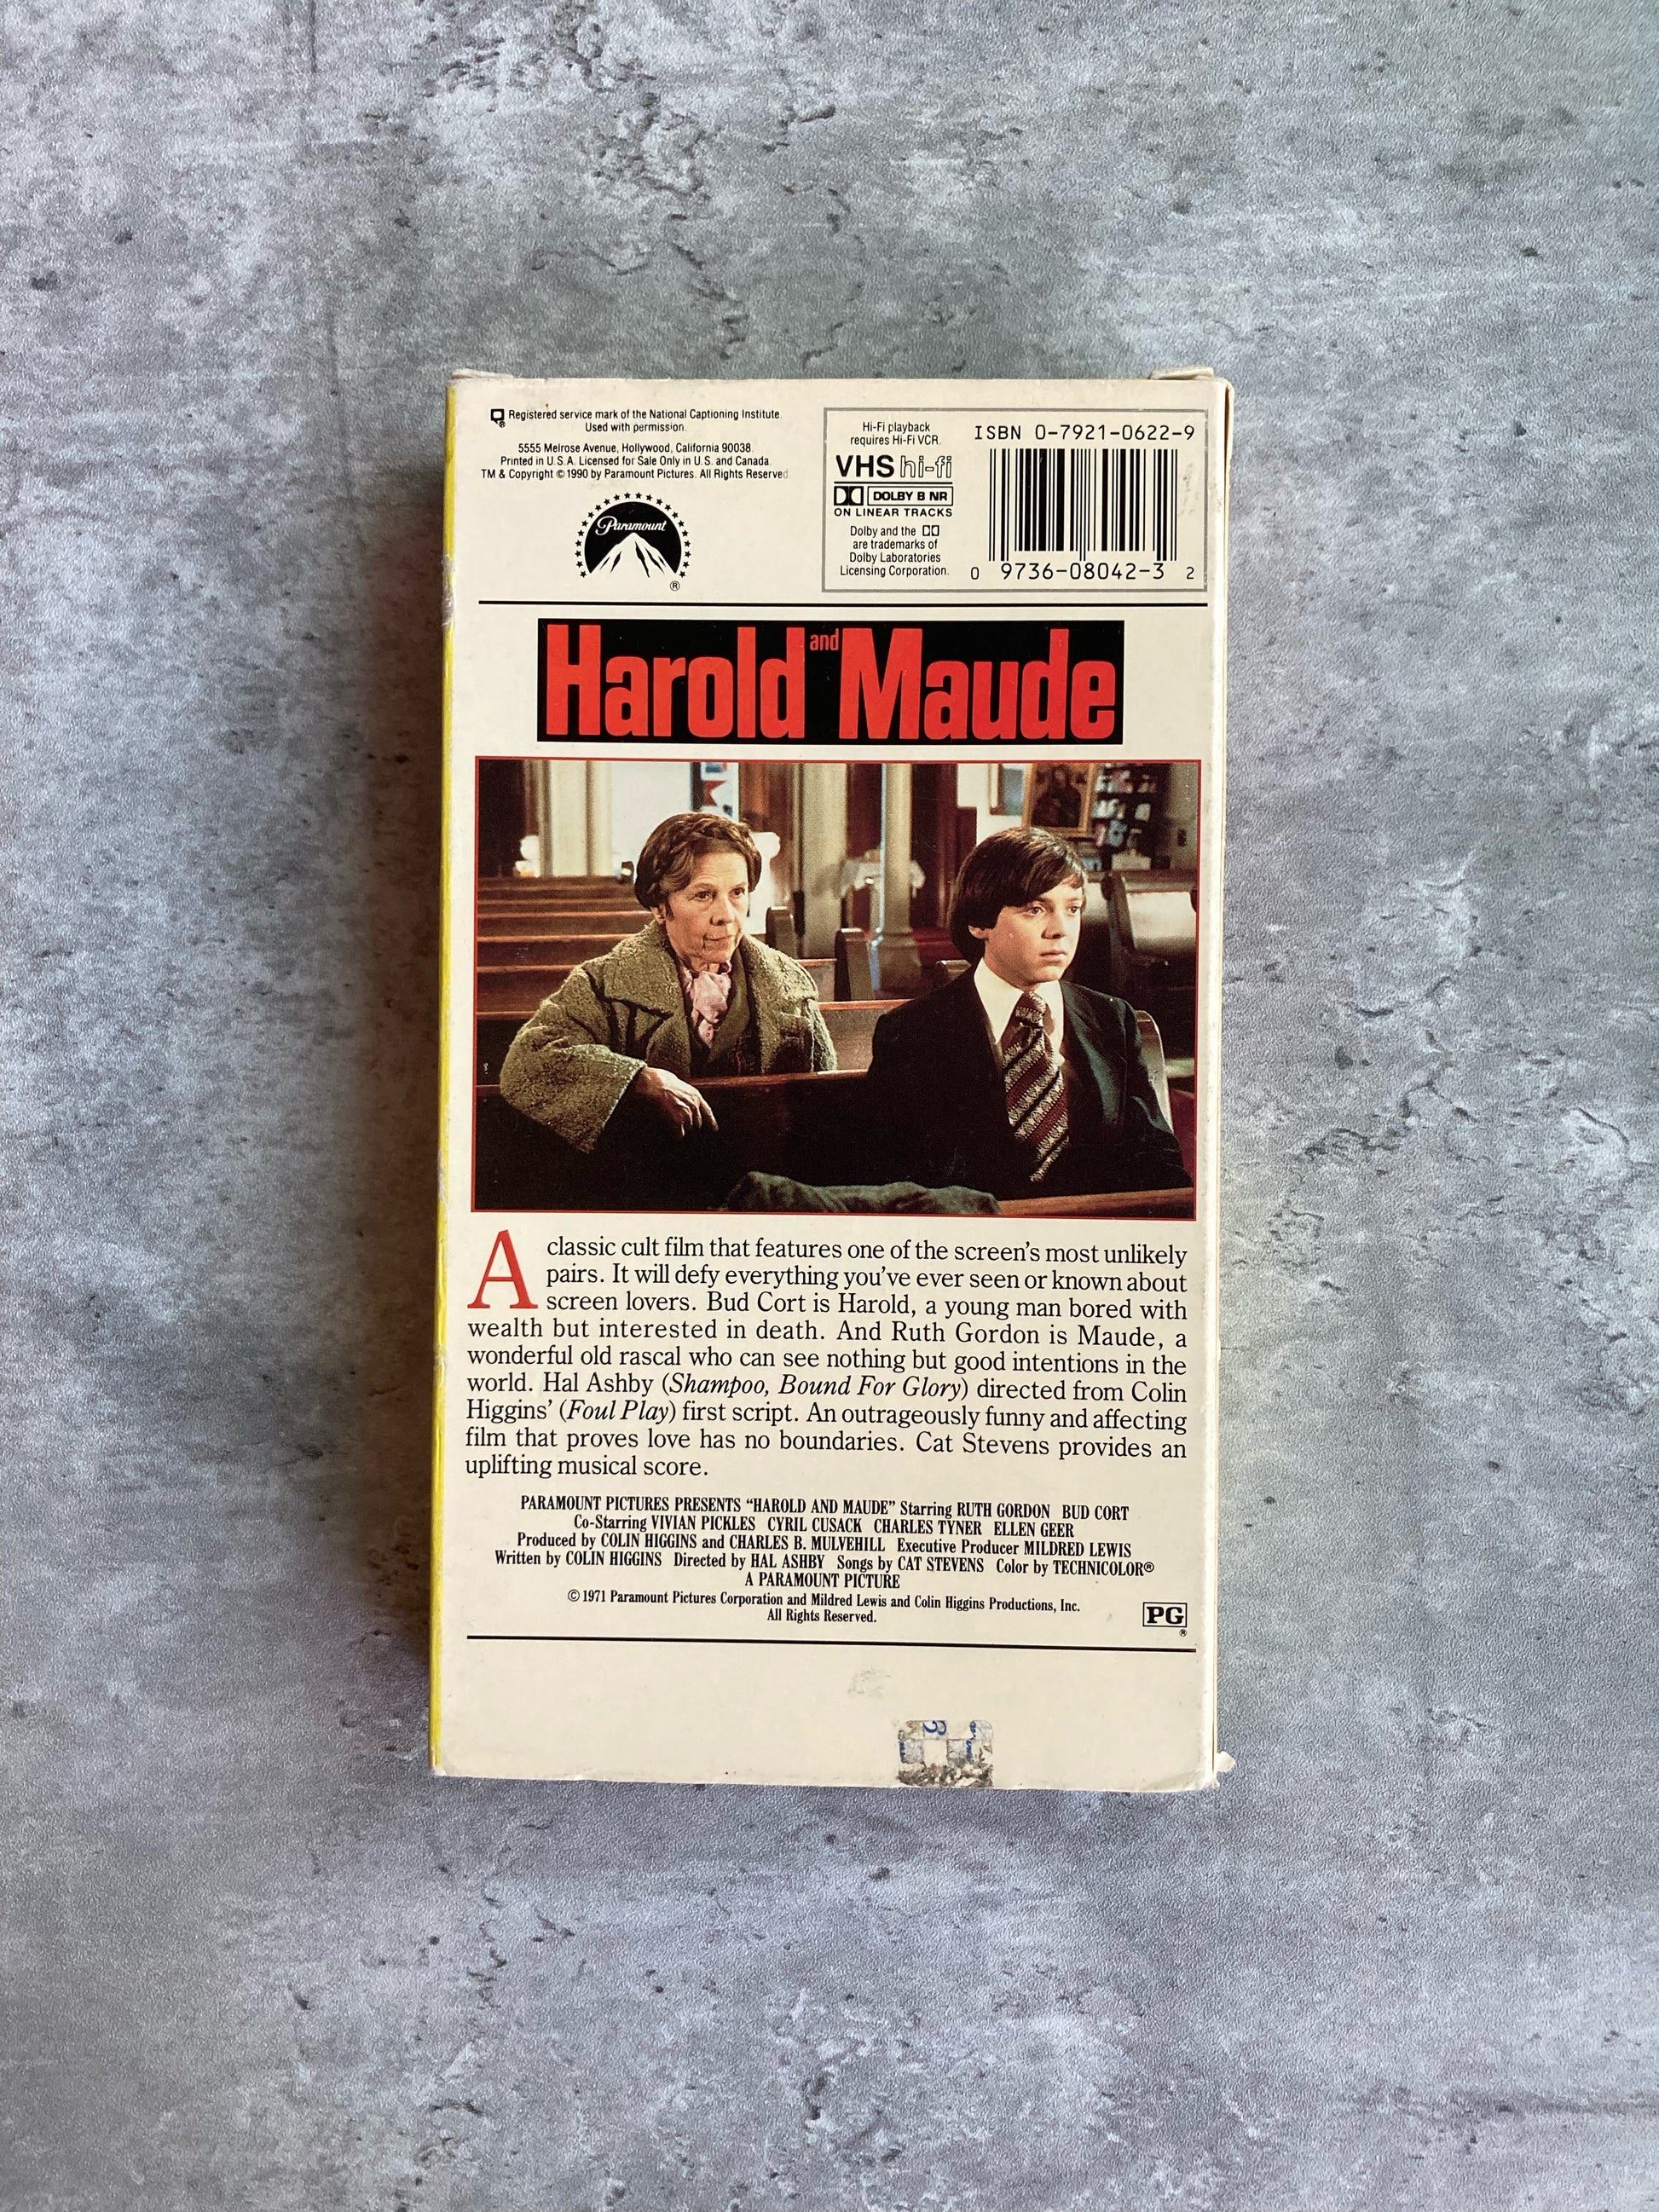 cover of Harold and Maude movie by Hal Ashby. Shop for film and VHS with The Stone Circle, the only online bookstore near you.